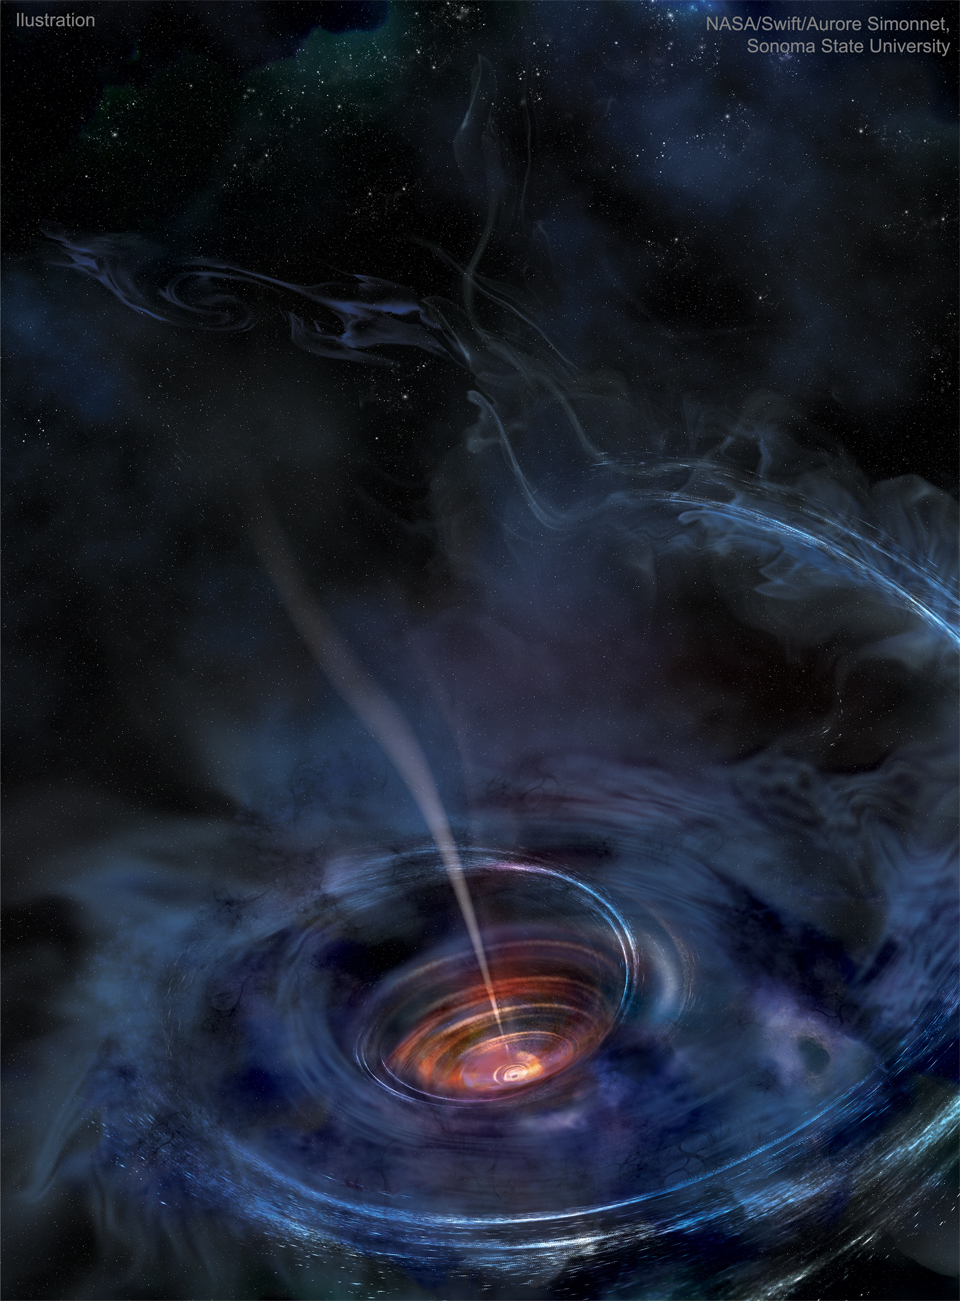 A swirling blue disk is illustrated with a deep
colourful indentation in the middle. A light coloured
jet shoots out of this middle, from a small dot that
is a black hole. 
Please see the explanation for more detailed information.